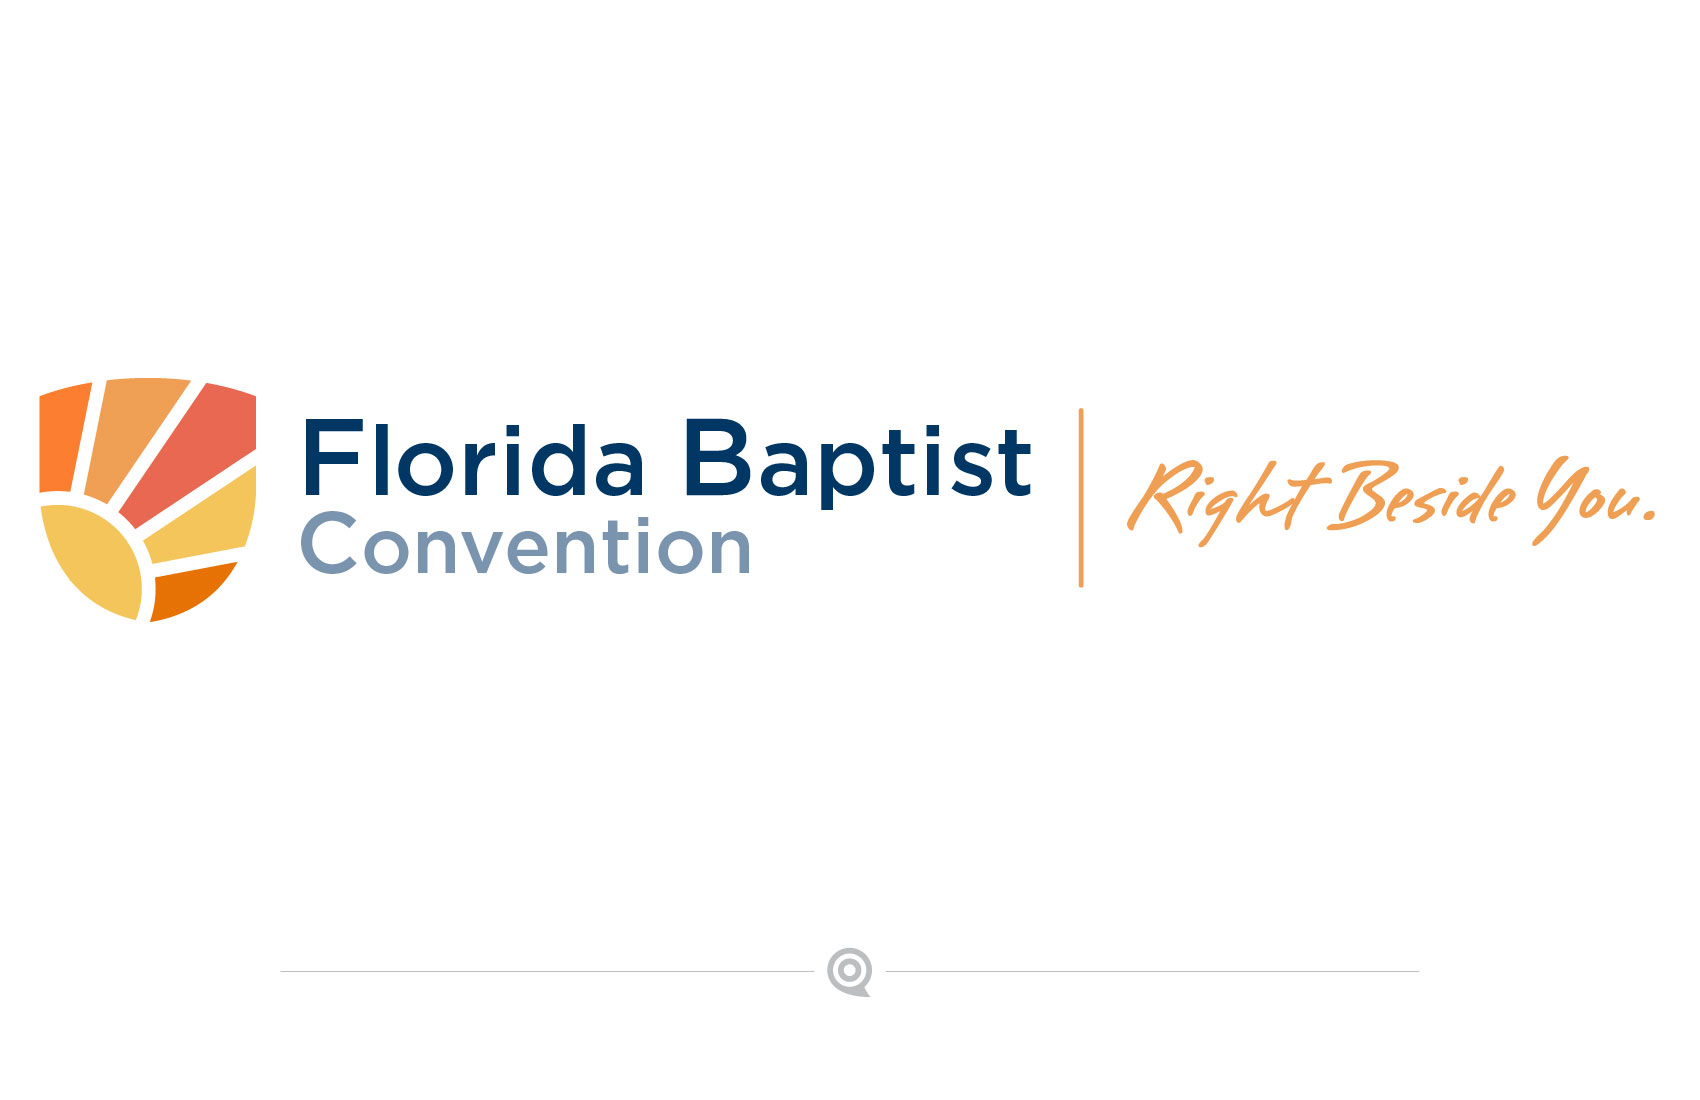 Florida Baptist Convention | Right Beside You.